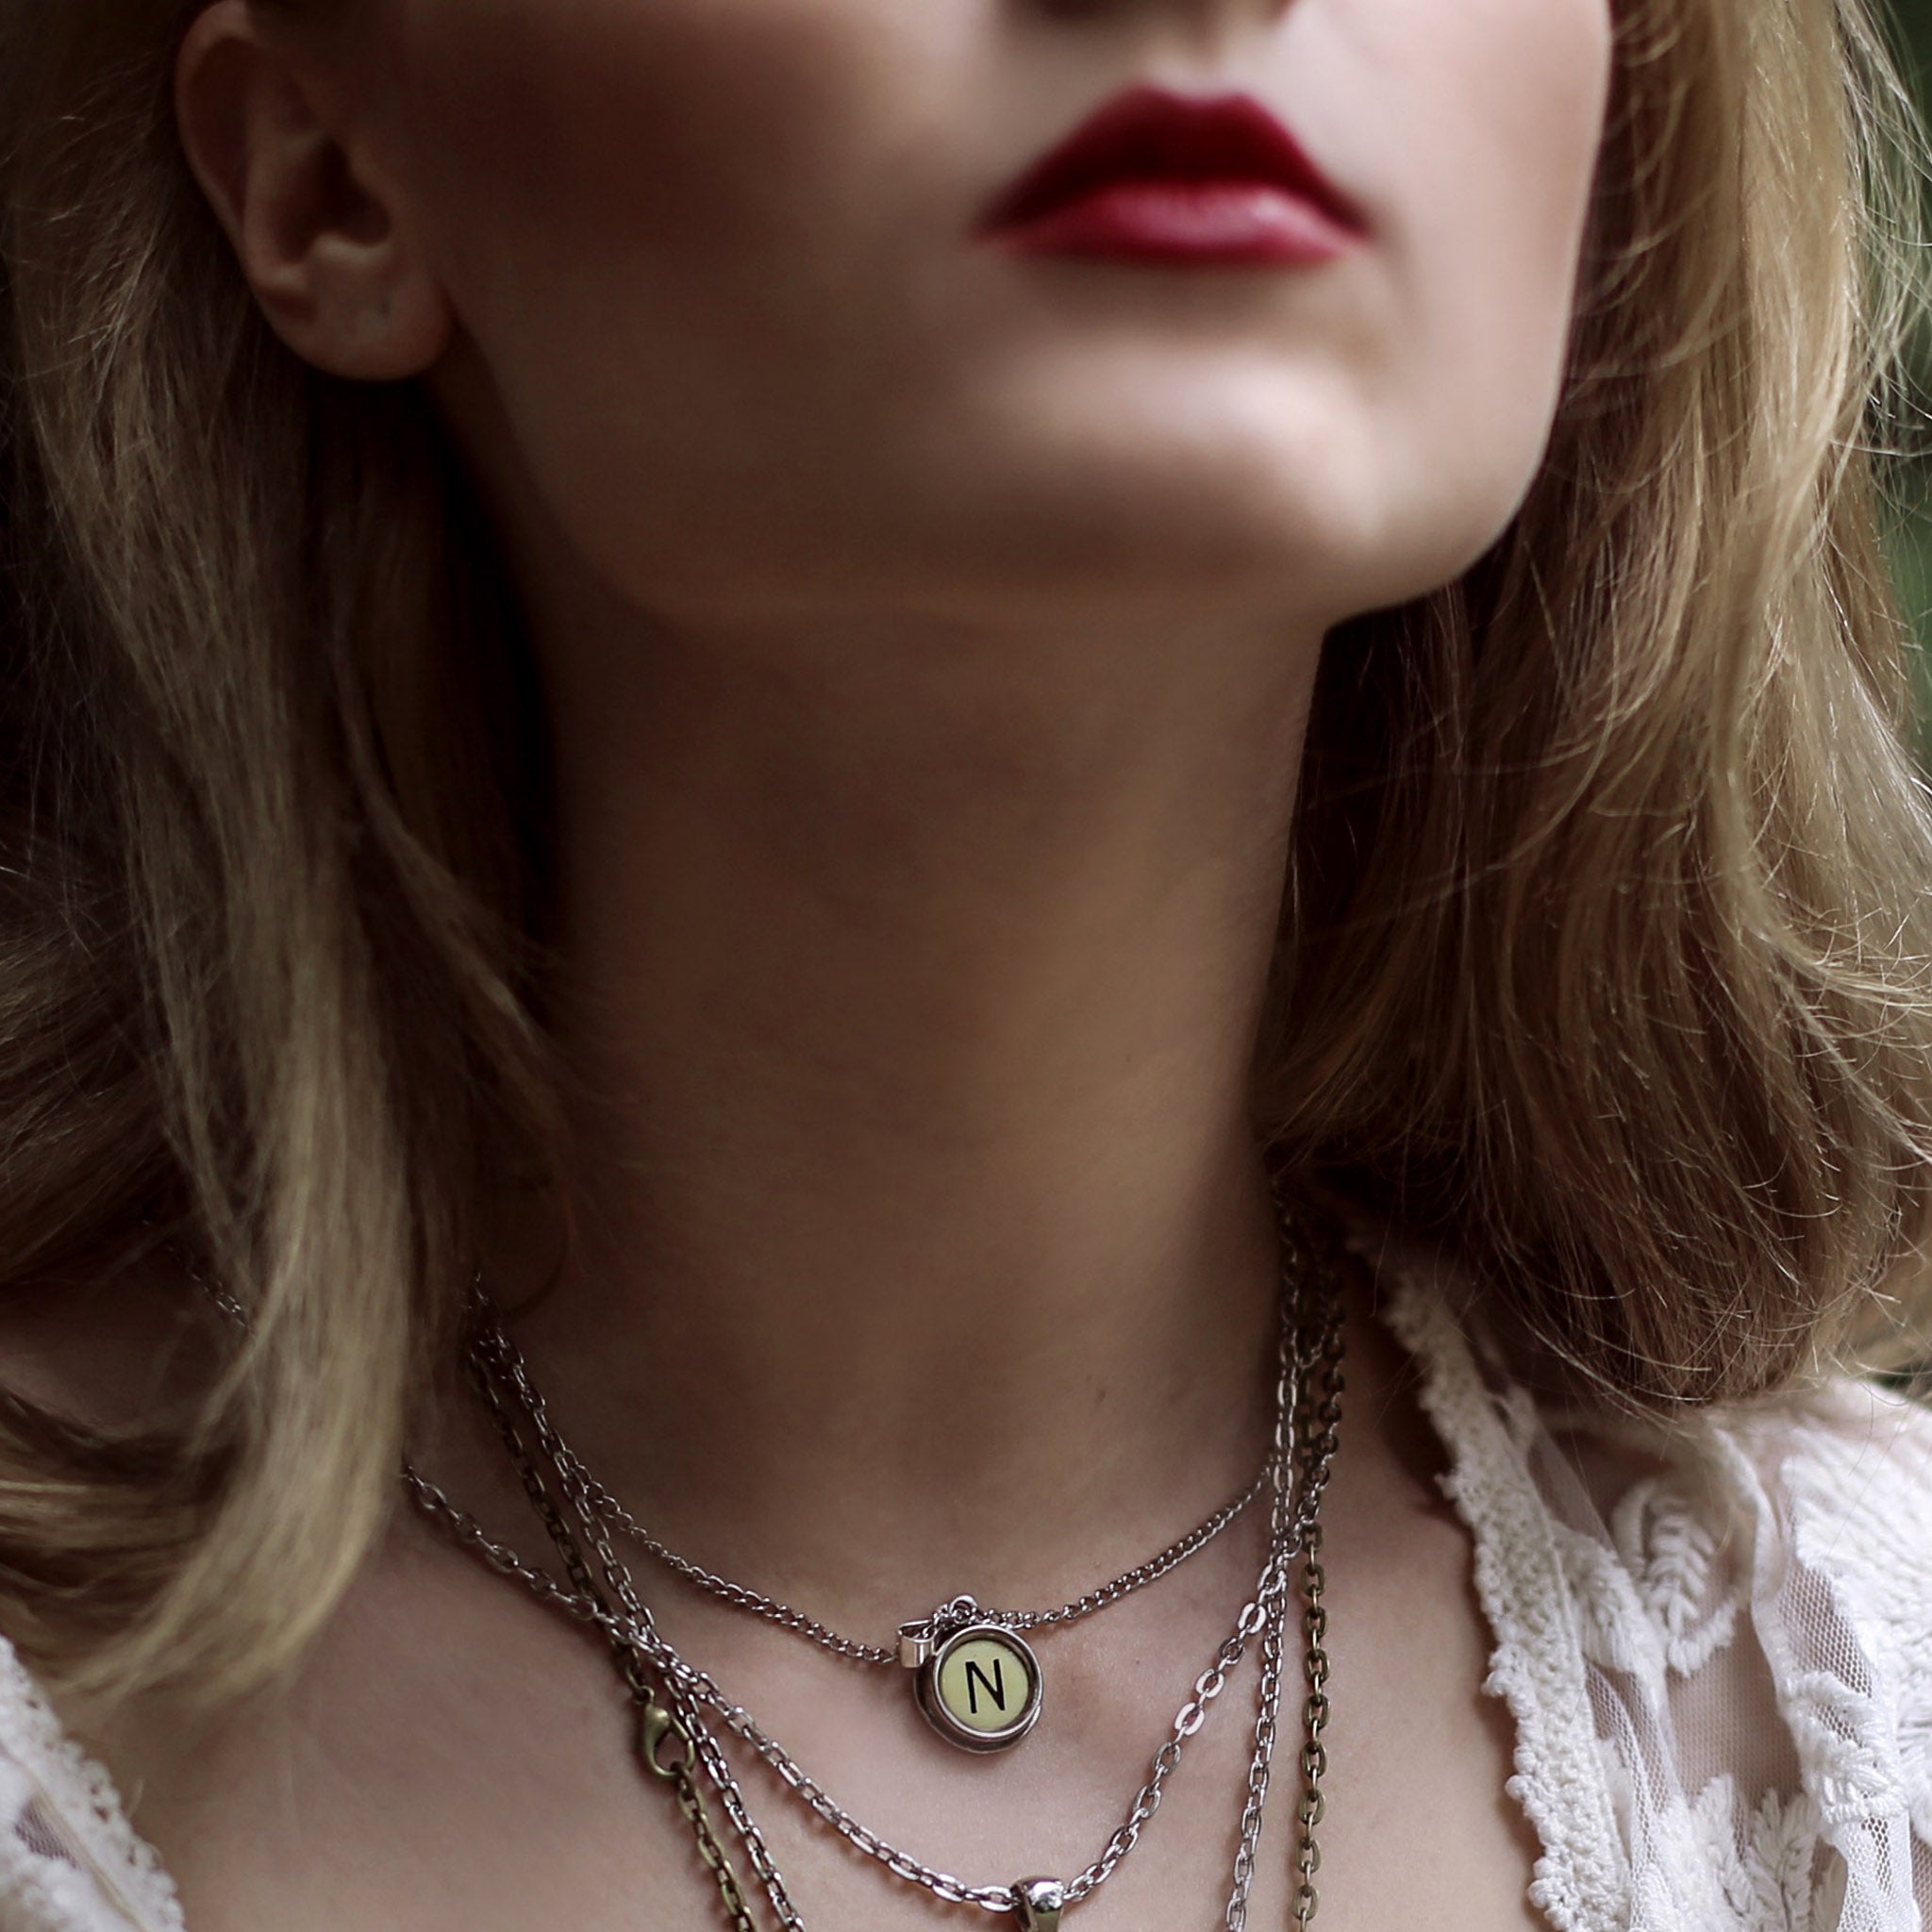 Model wearing a magnificent initial necklace made of authentic vintage typewriter key